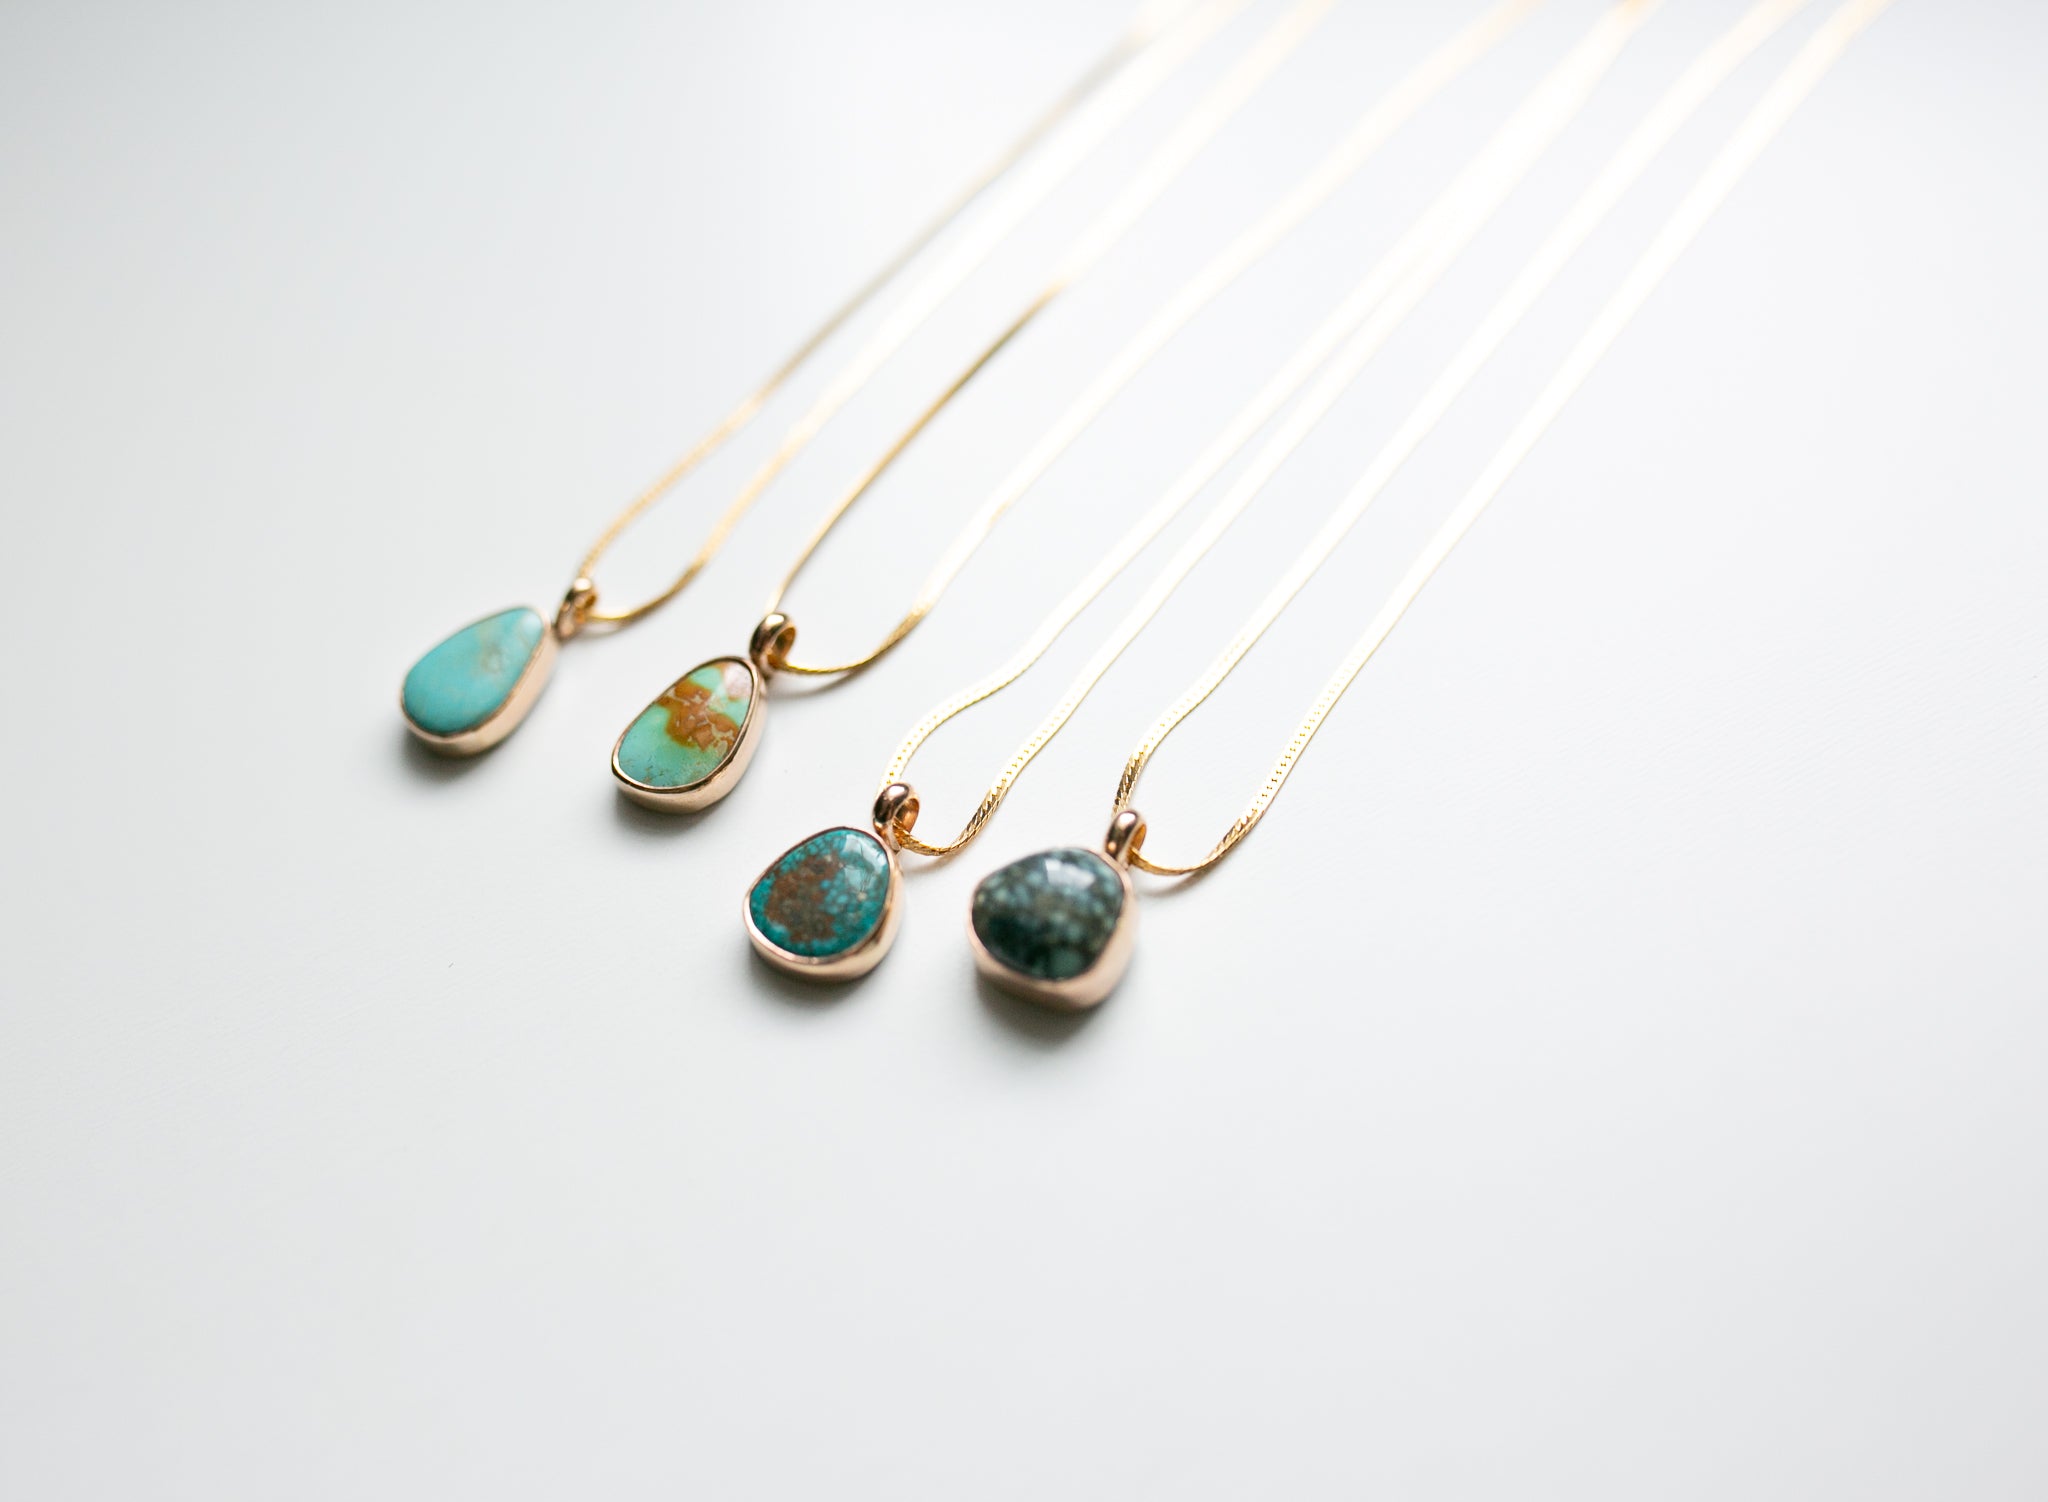 Handcrafted Turquoise Talisman Gold Filled Herringbone Necklace